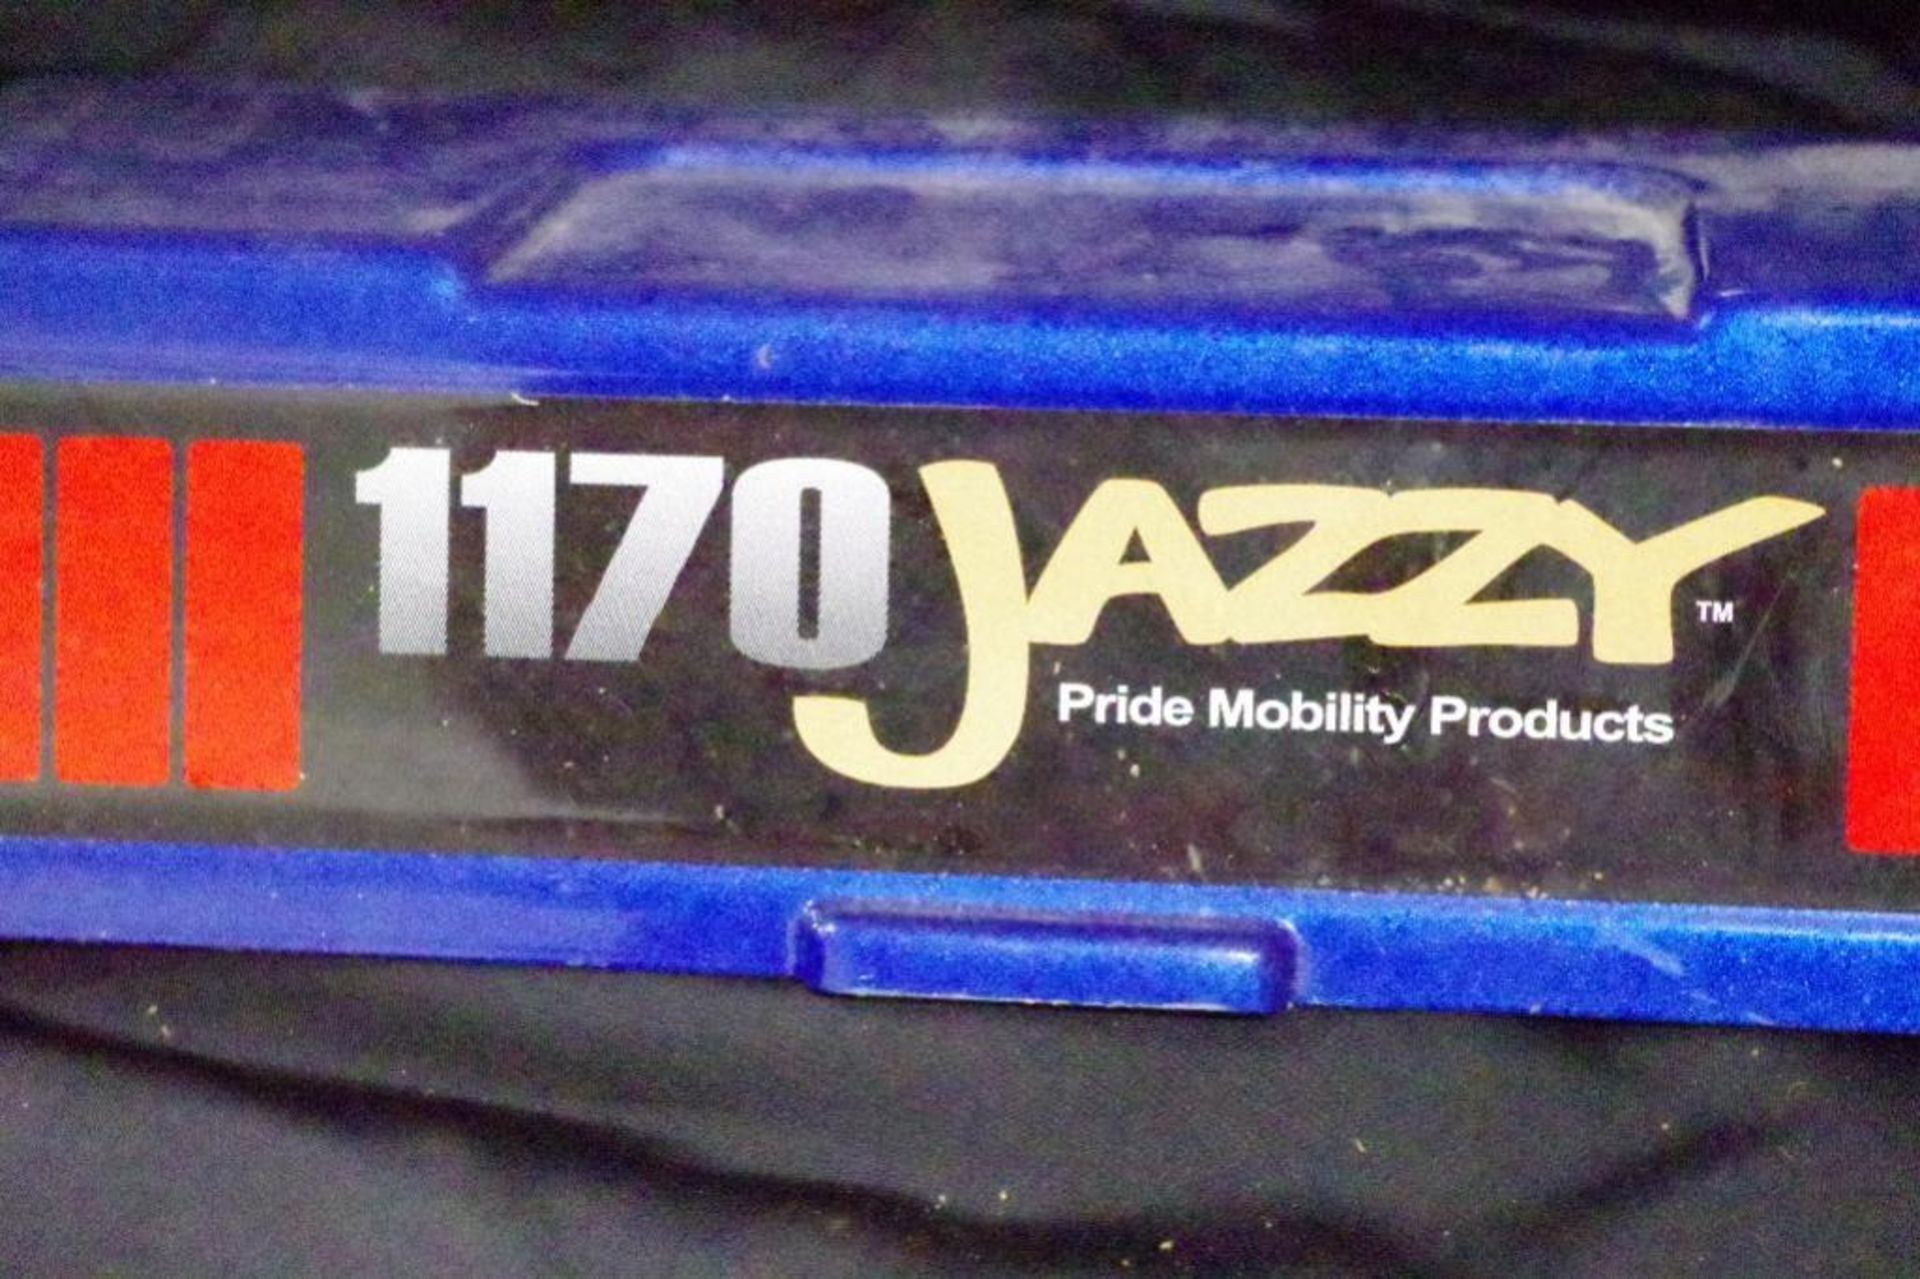 JAZZY 1170 Series Power Chair (Needs New Battery) - Image 6 of 6